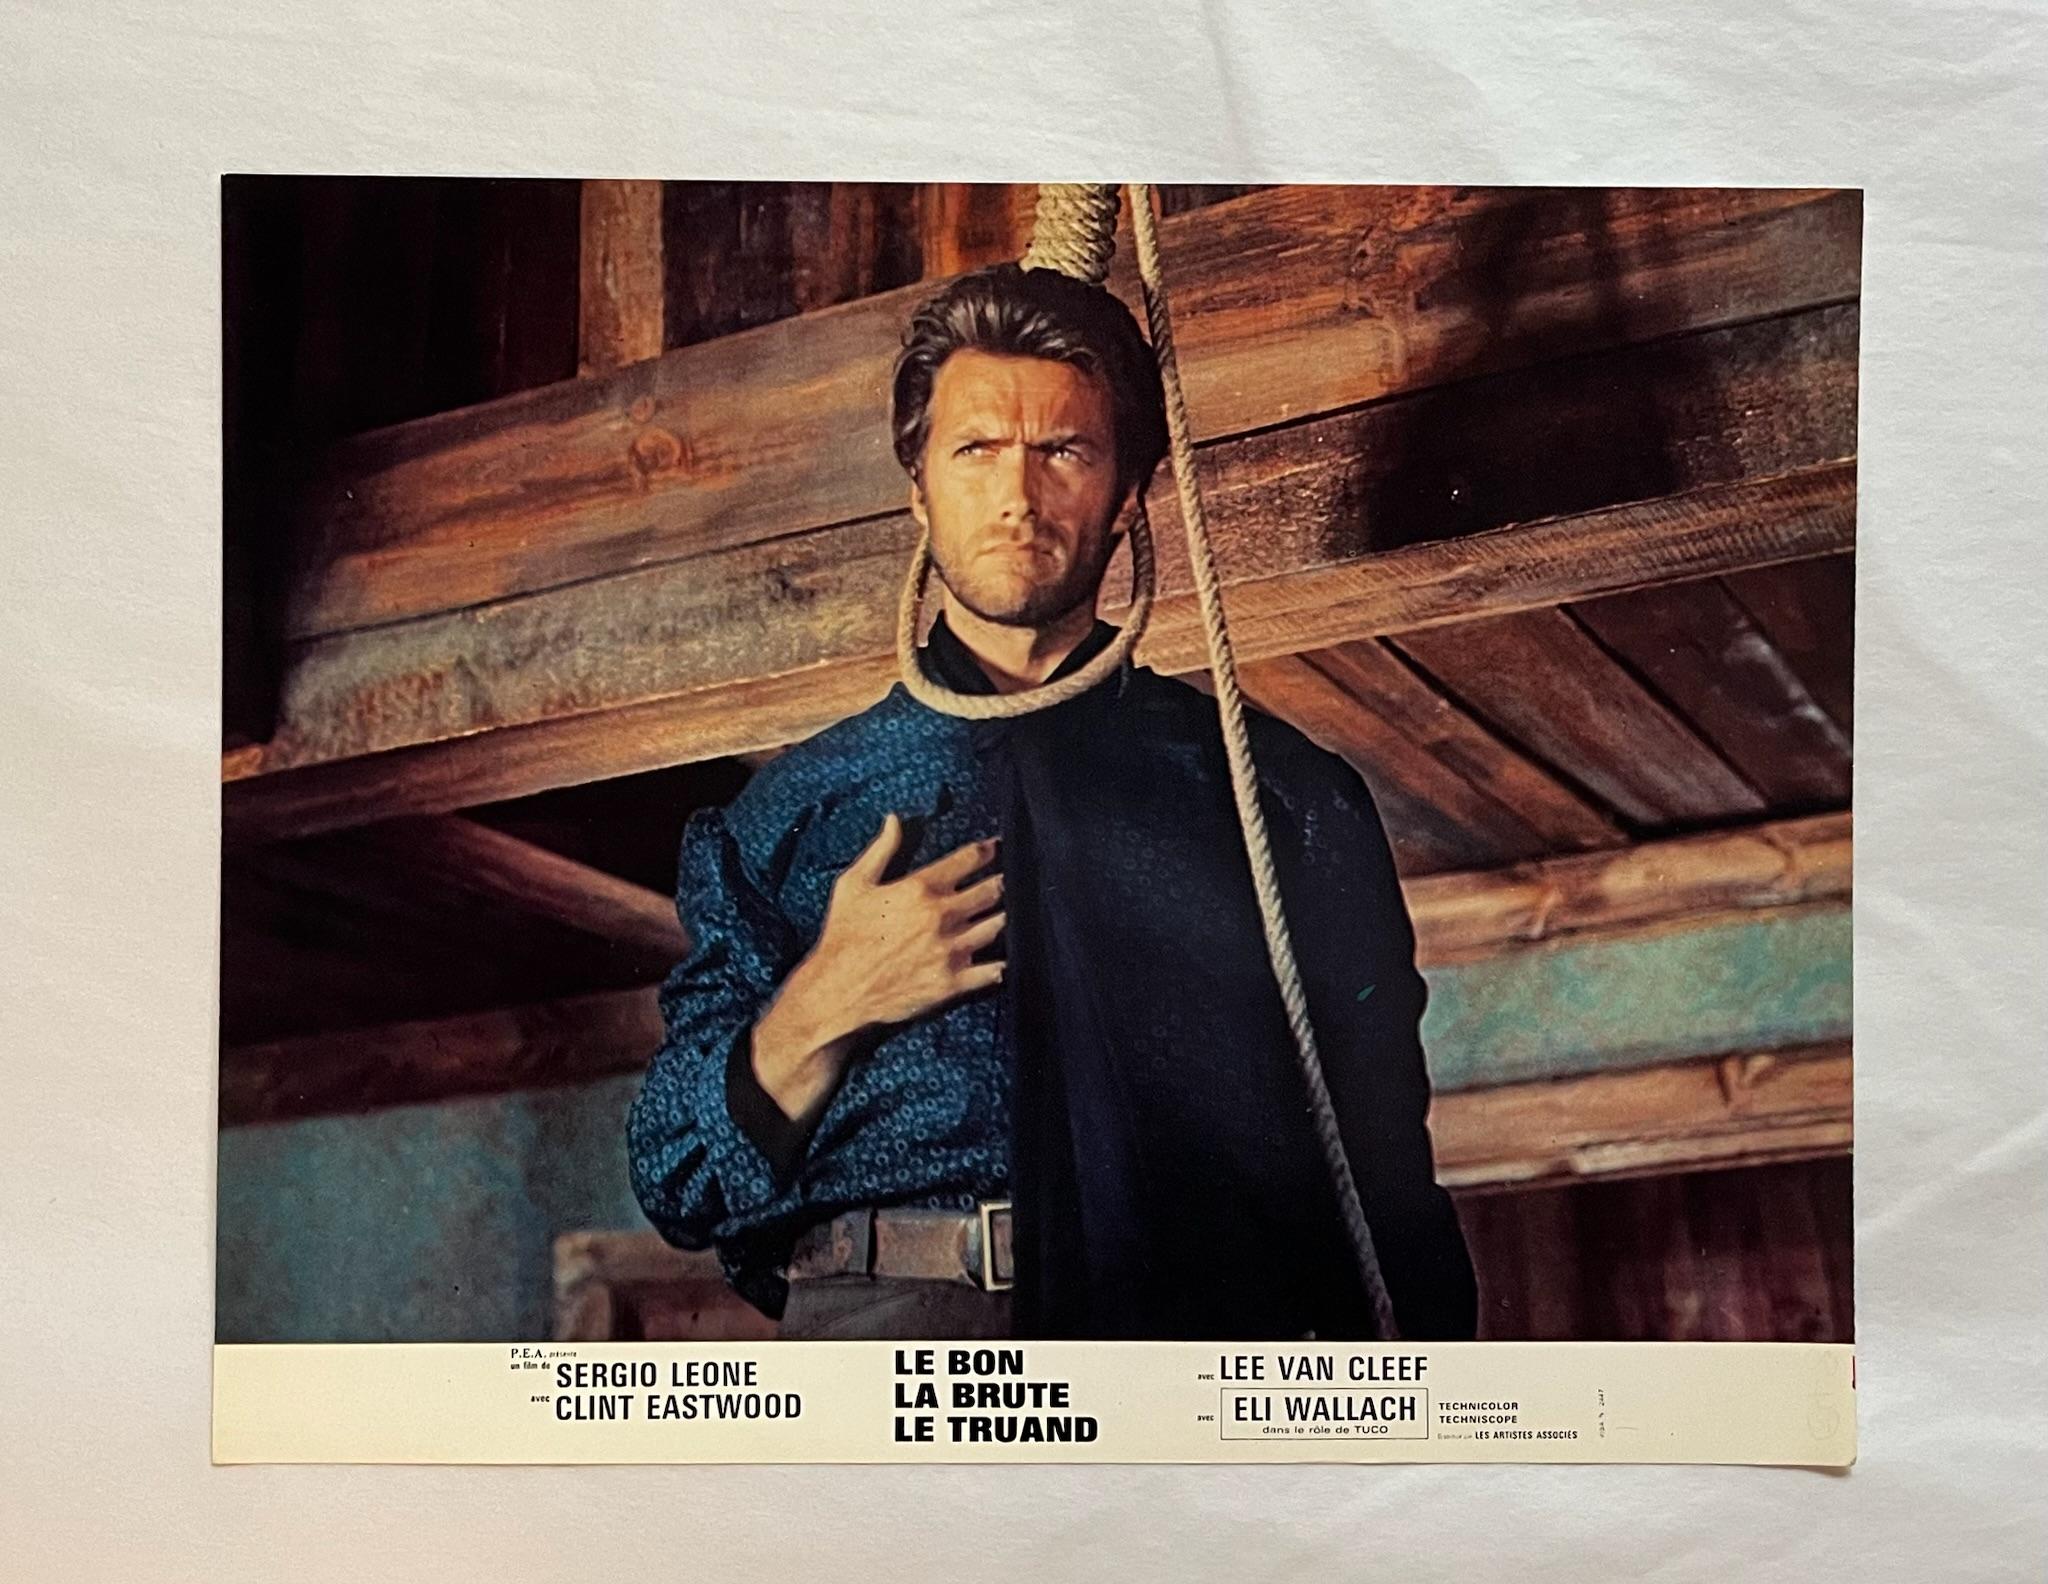 Clint Eastwood The Good The Bad The Ugly - Original 1966 French Lobby Card   - Print by Unknown